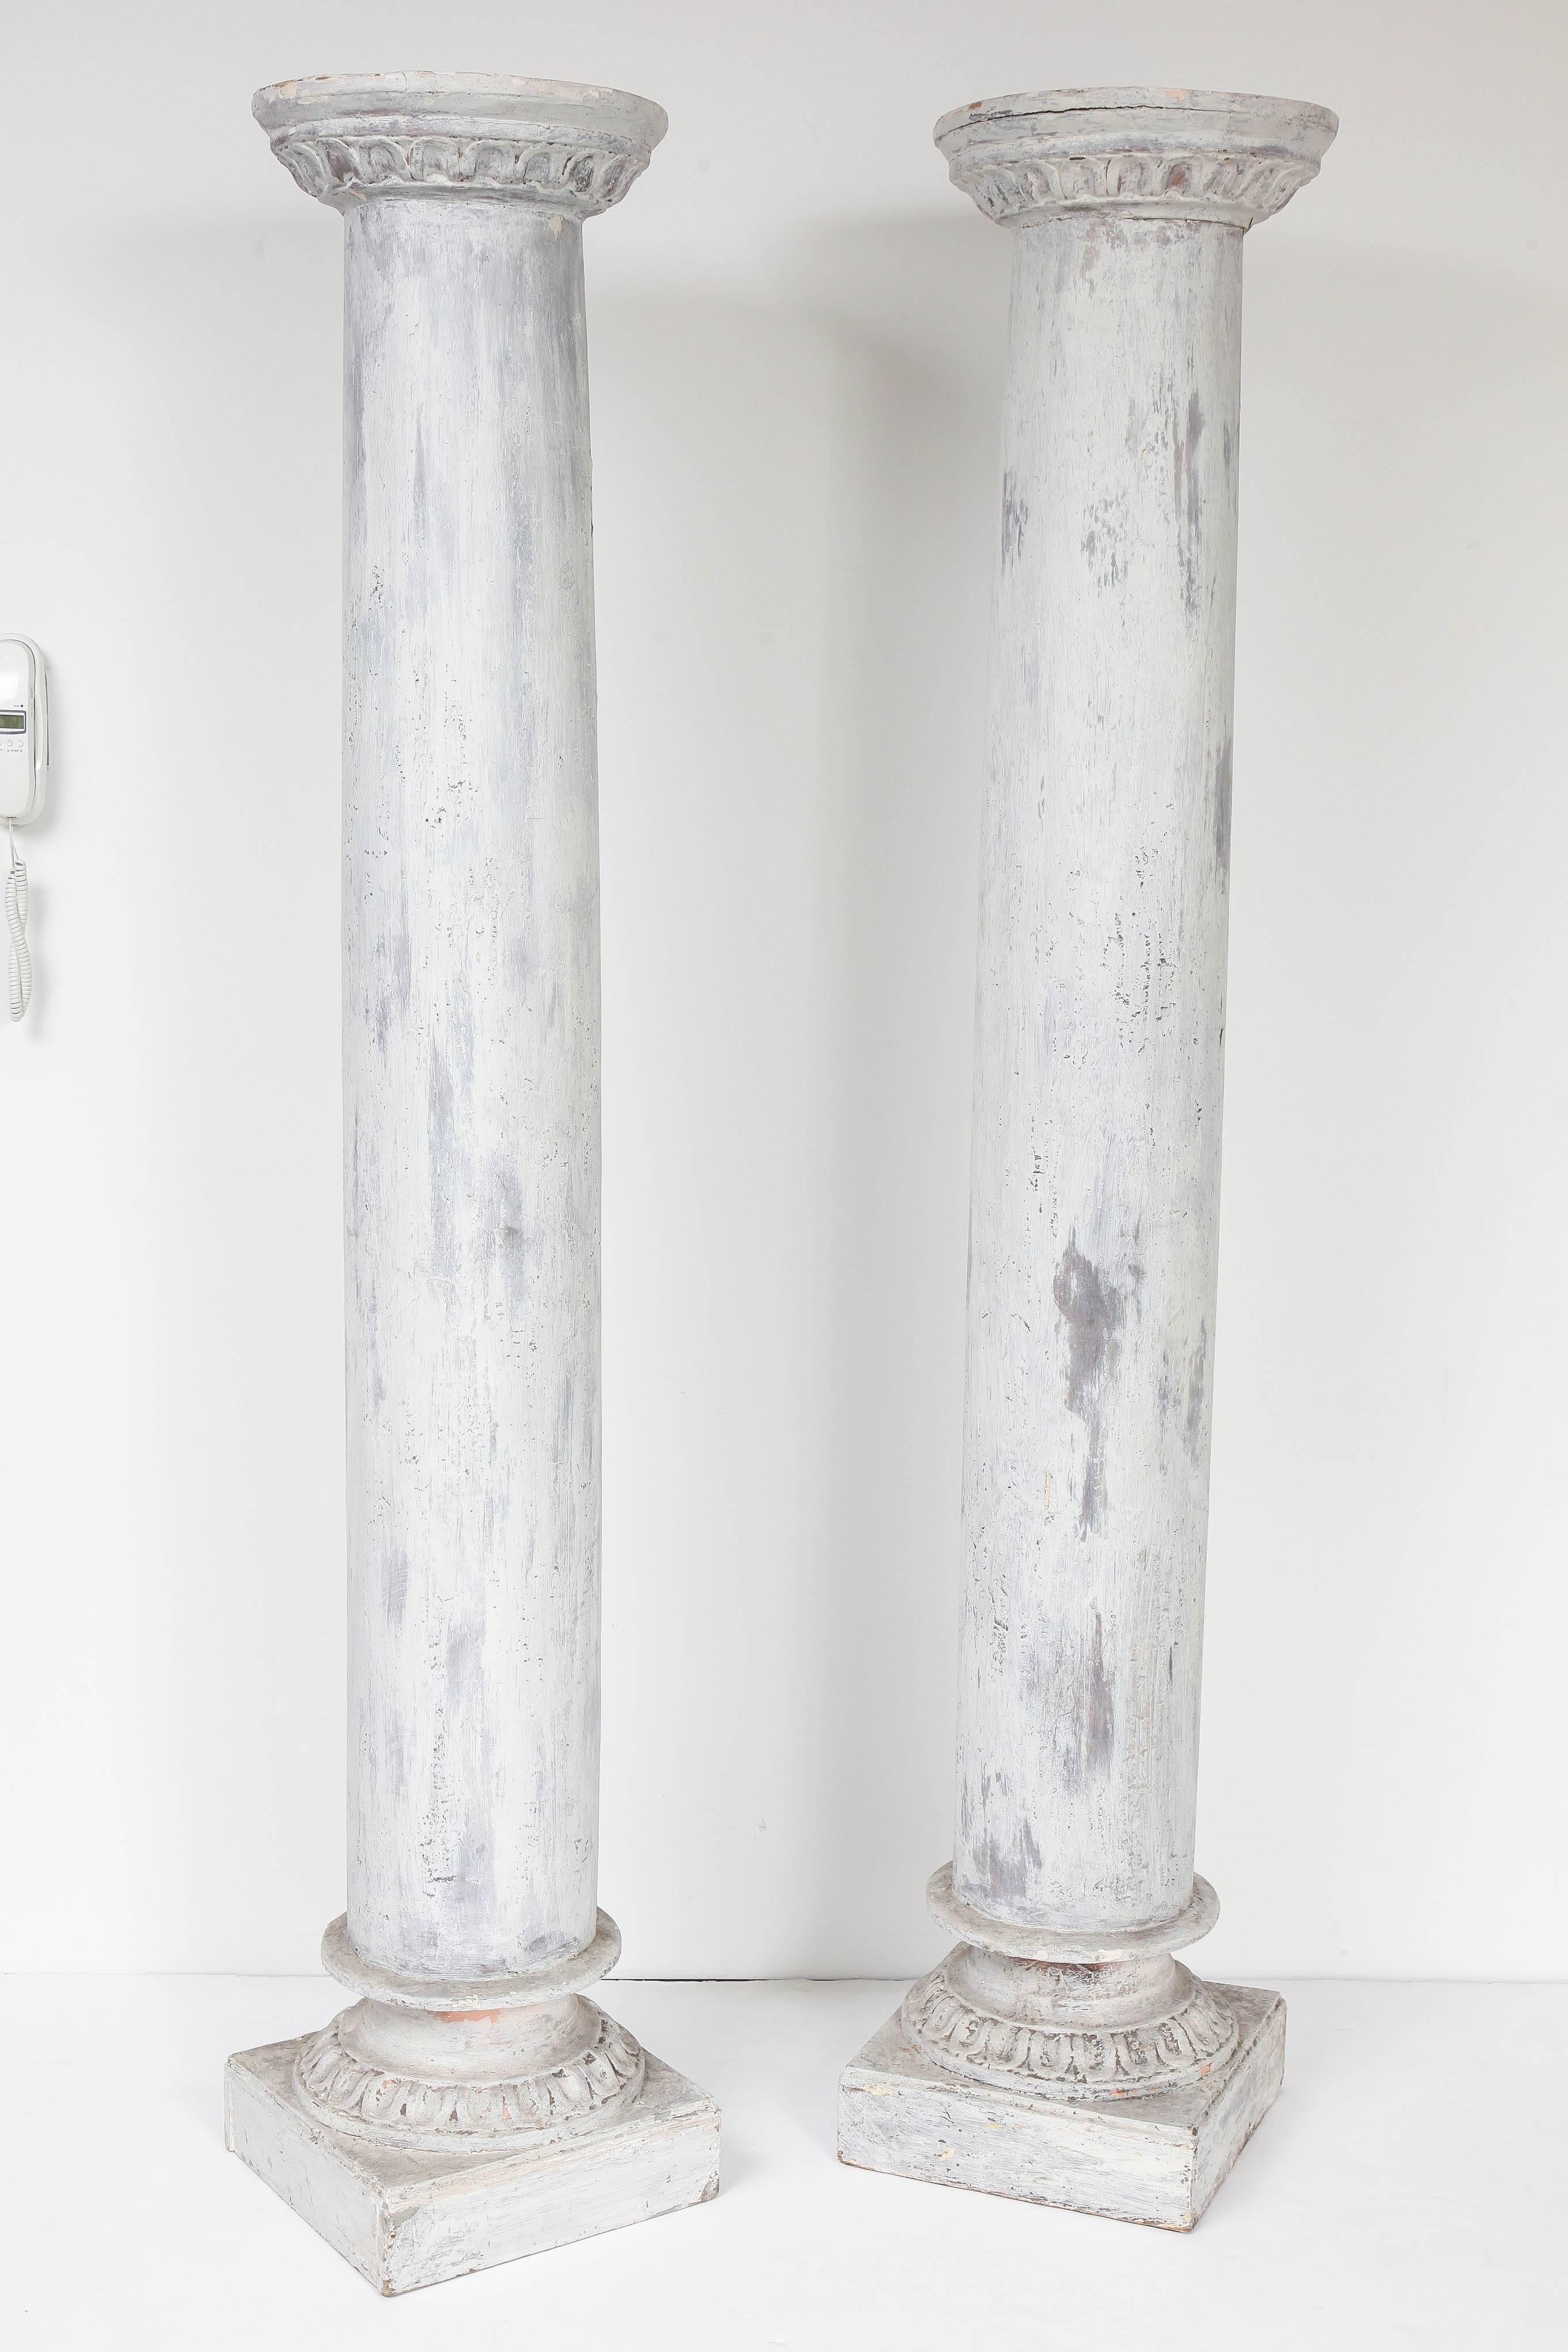 A fabulous pair of painted wood columns. From a theater in the south of France, these will add architectural interest and a bit of drama to any space.